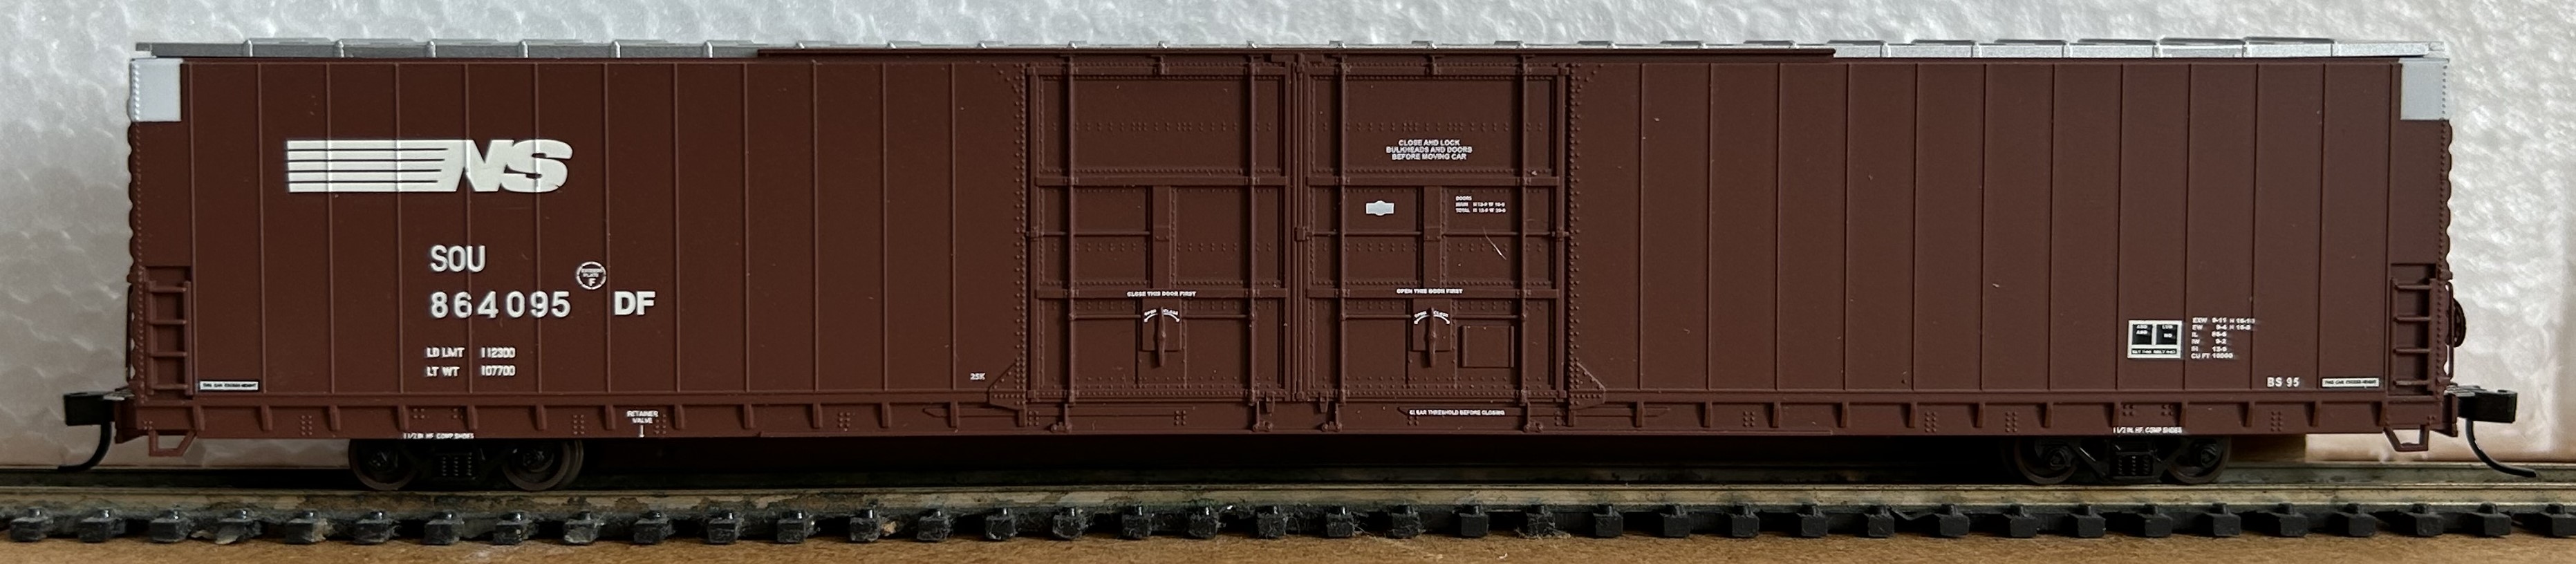 N Scale - Bluford Shops - 86032-2 - Boxcar, 85 or 86 Foot, Auto Parts - Norfolk Southern - 864095